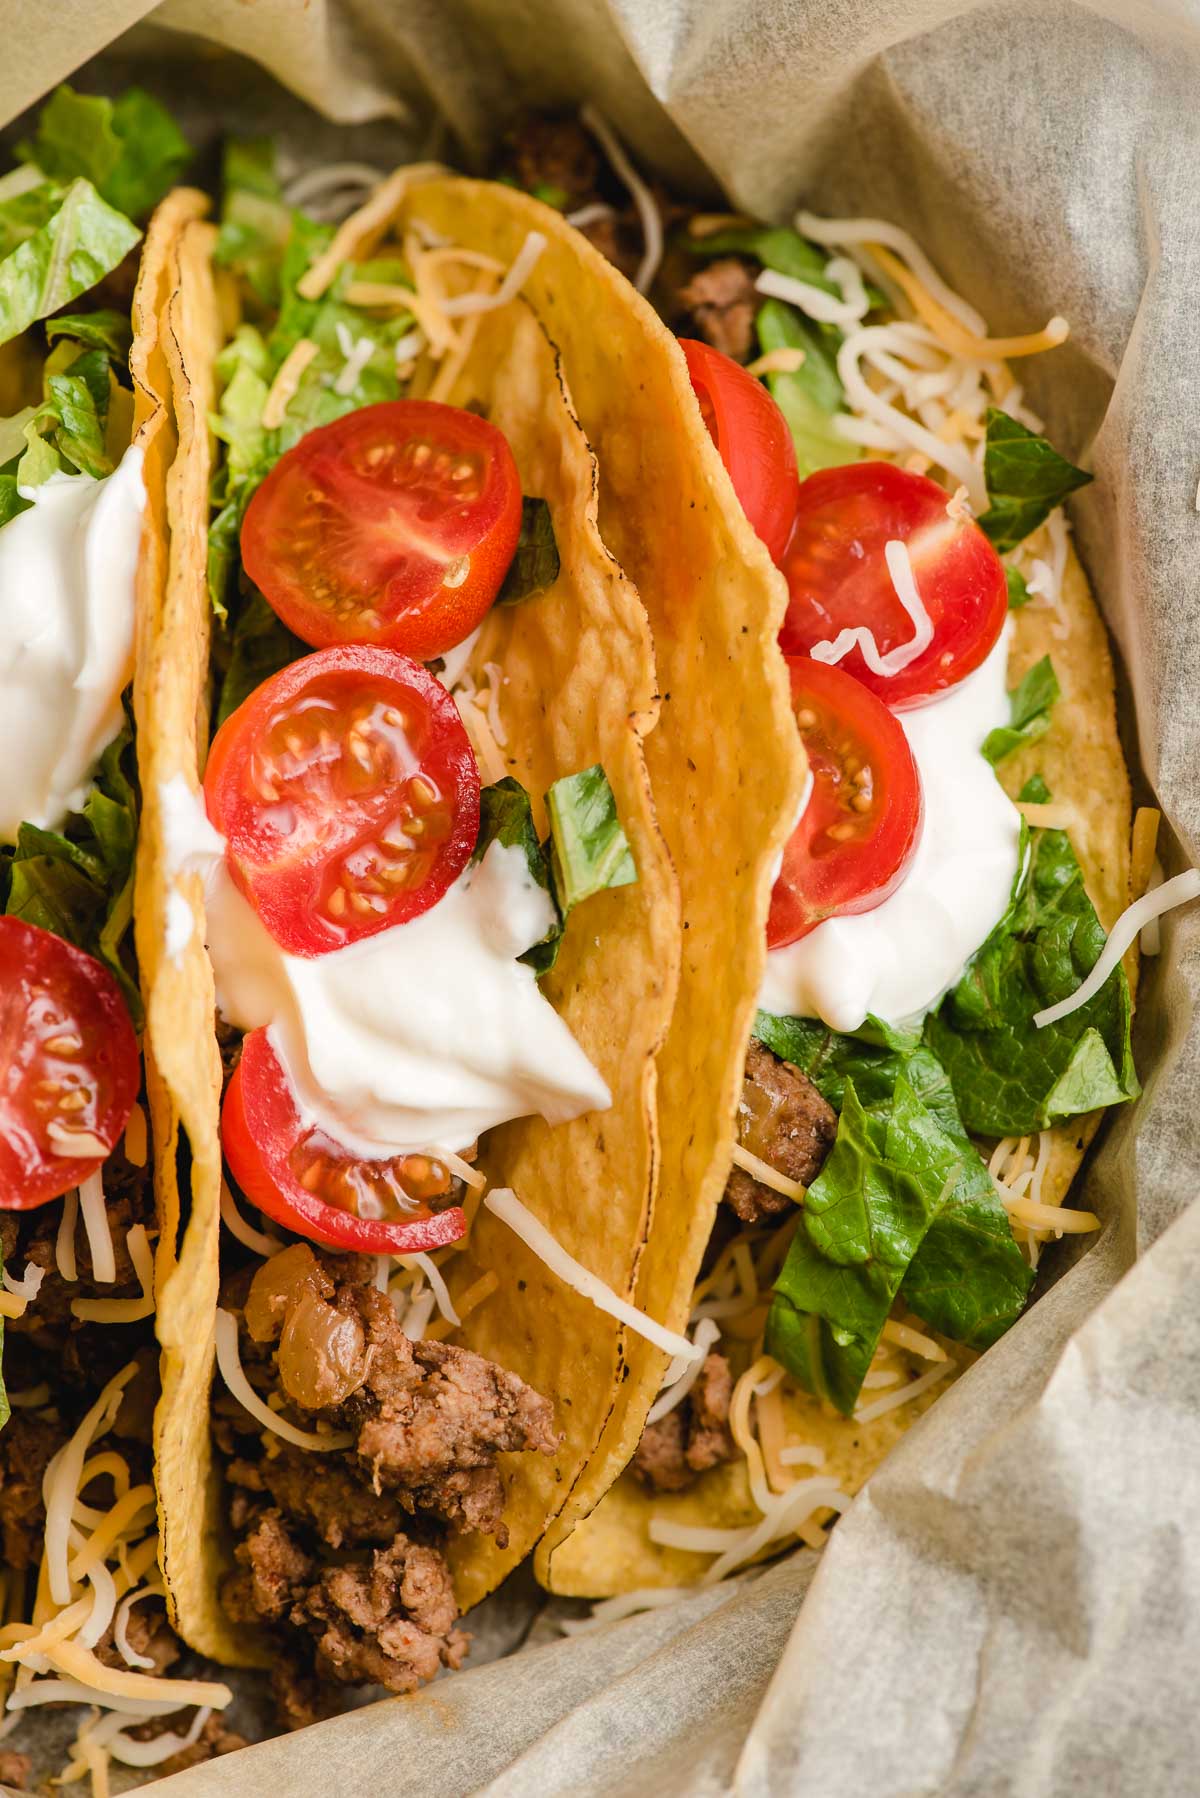 Three crunchy tacos topped with ground beef, tomatoes, sour cream, and lettuce in a brown paper lined skillet.